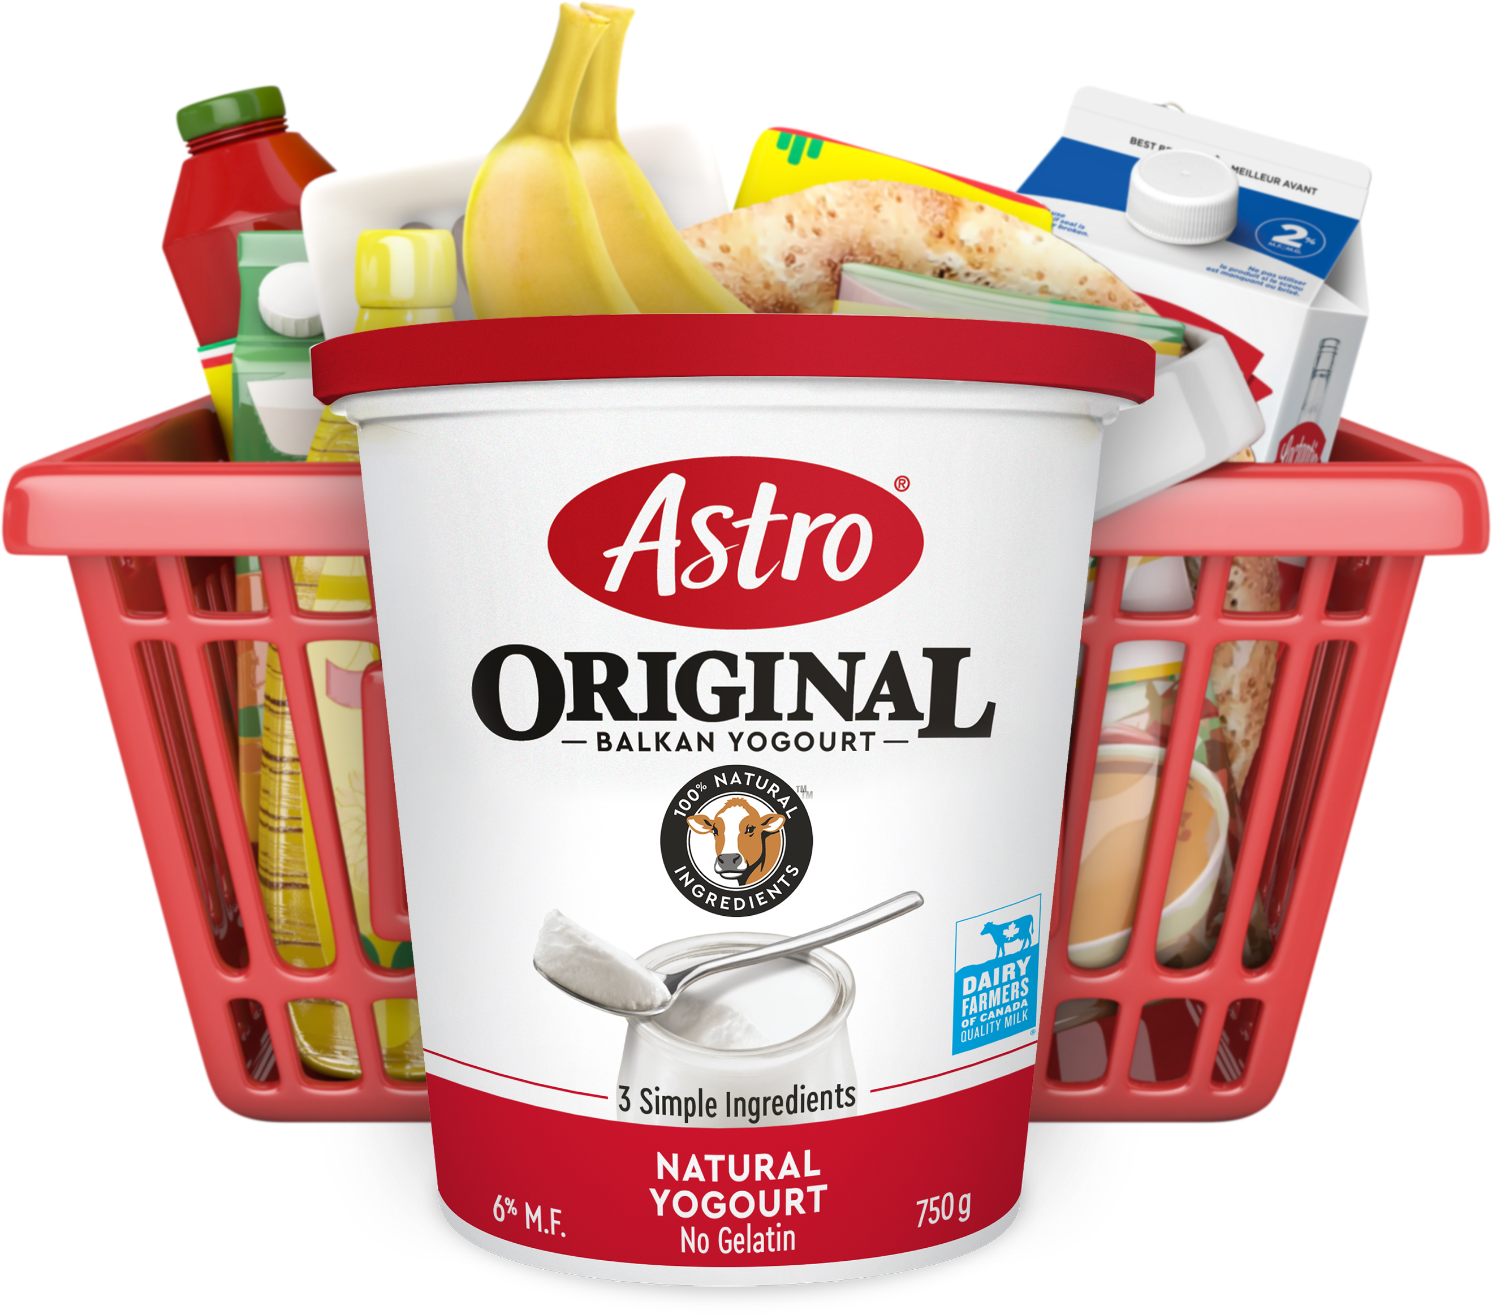 Astro yogourt in front of a basket of groceries